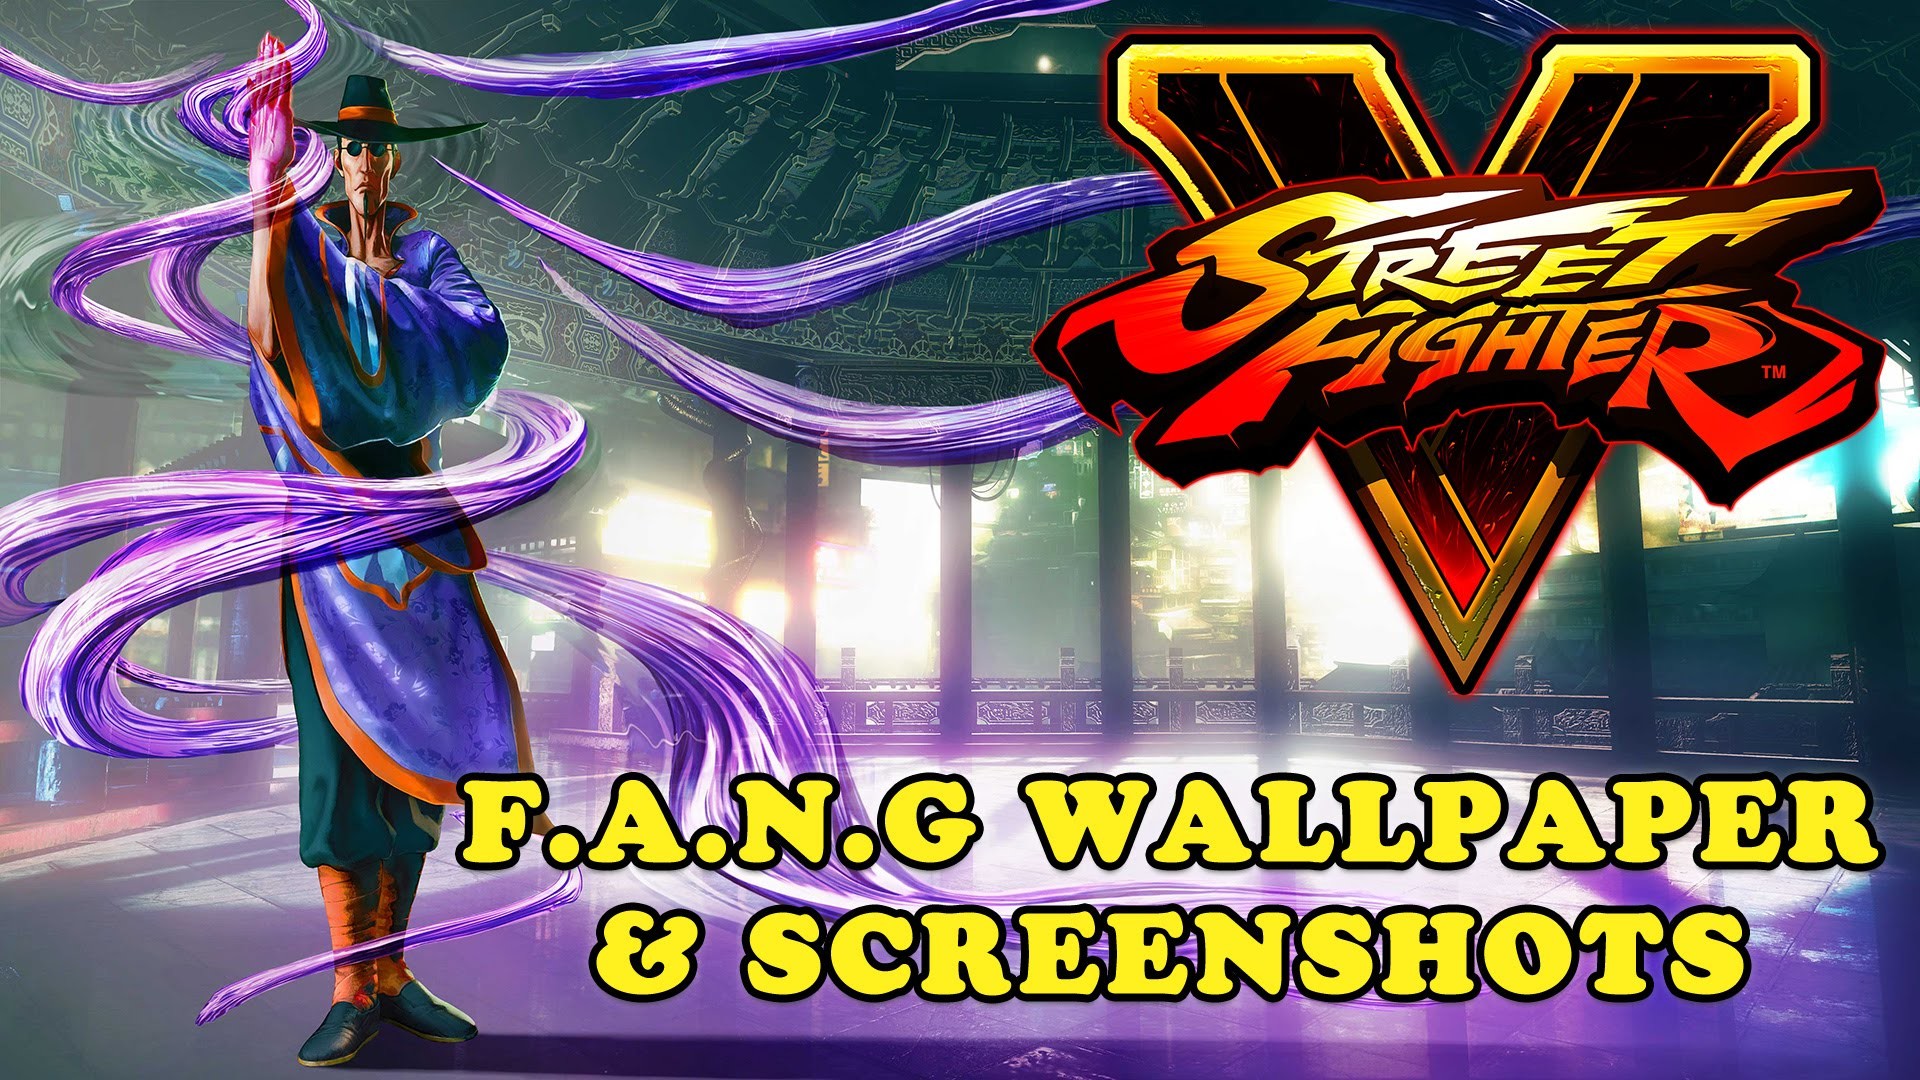 1920x1080 Street Fighter V - F.A.N.G Wallpaper and Screenshots (Download Link)